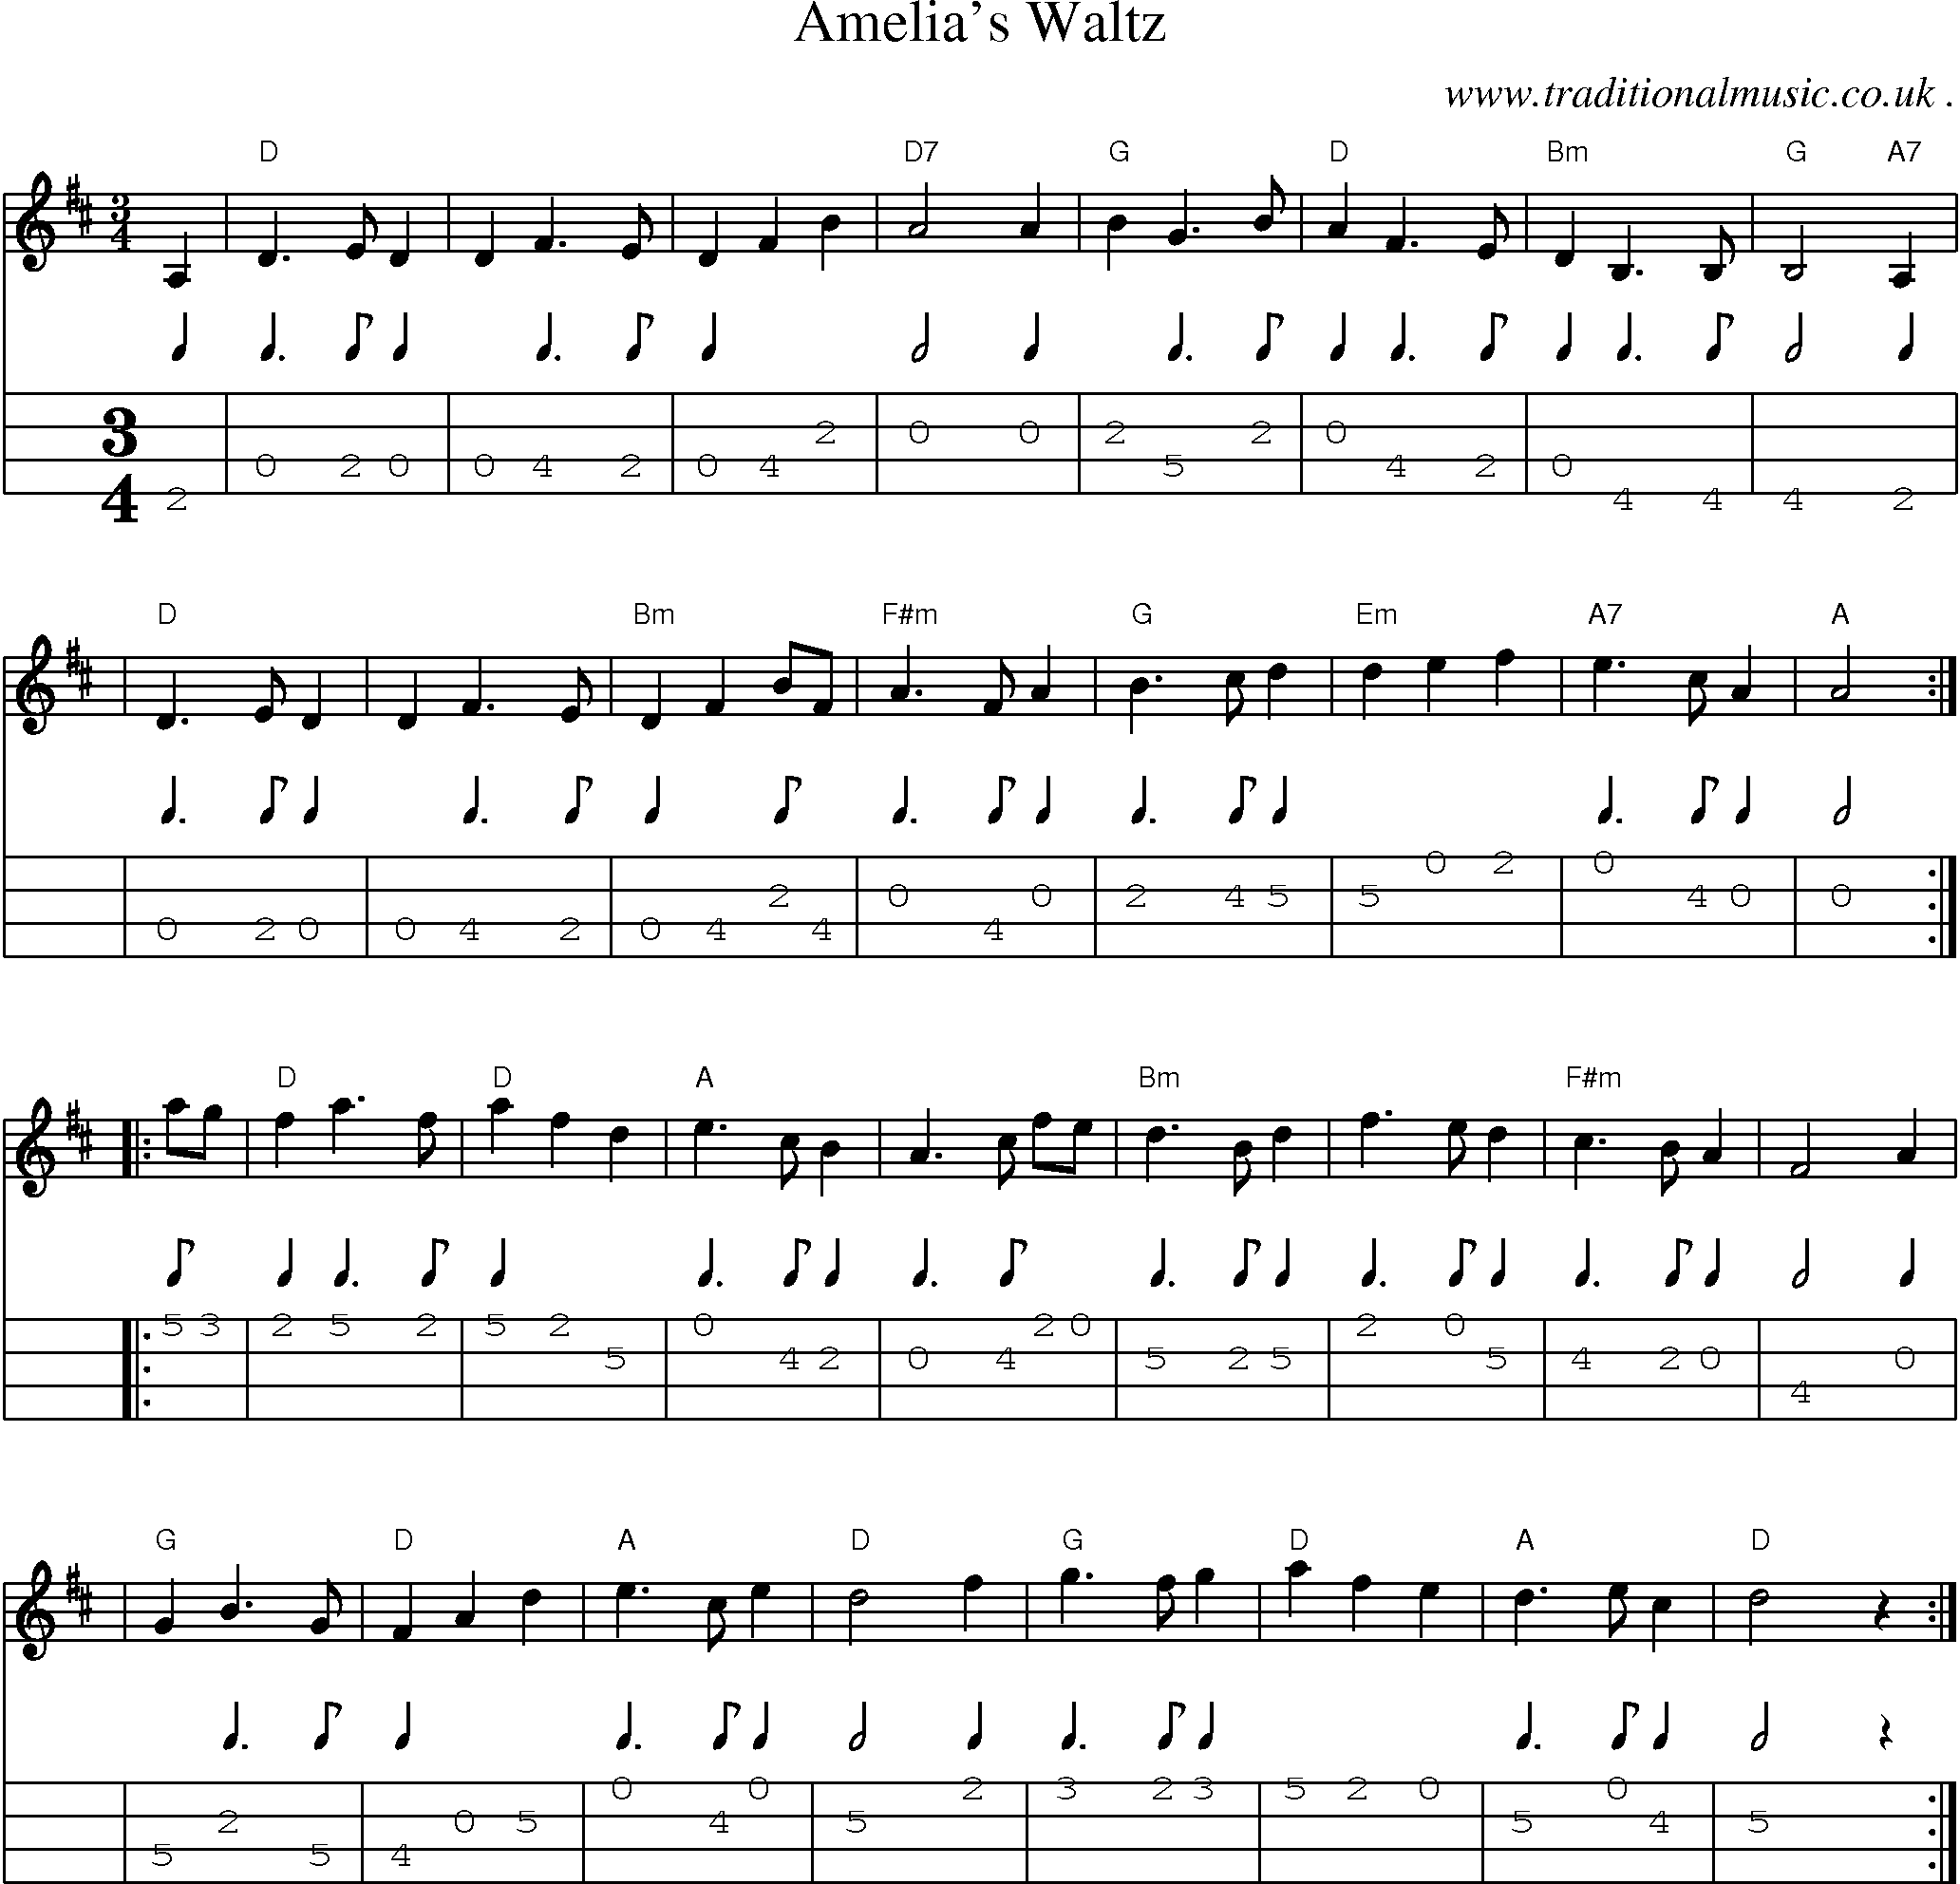 Sheet-music  score, Chords and Mandolin Tabs for Amelias Waltz